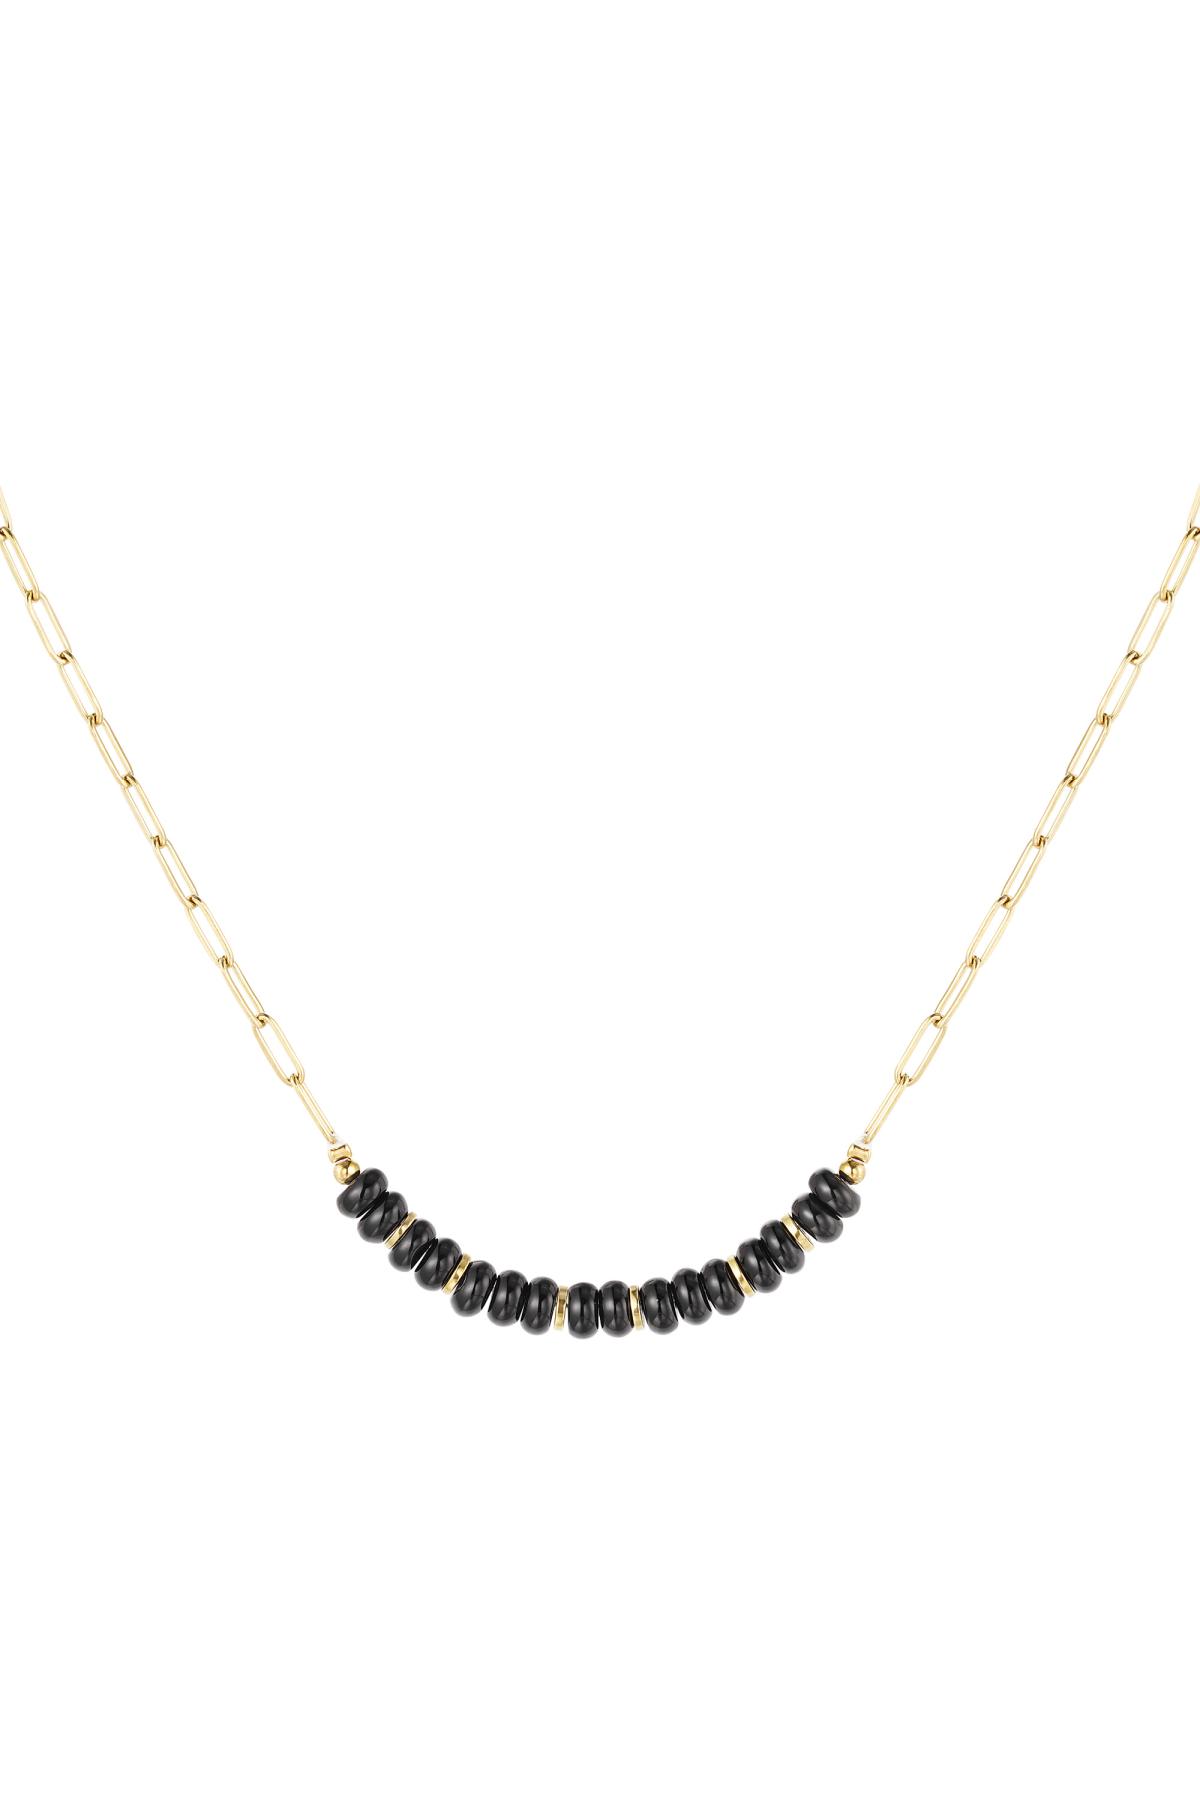 Link necklace with stone beads Black & Gold Stainless Steel 